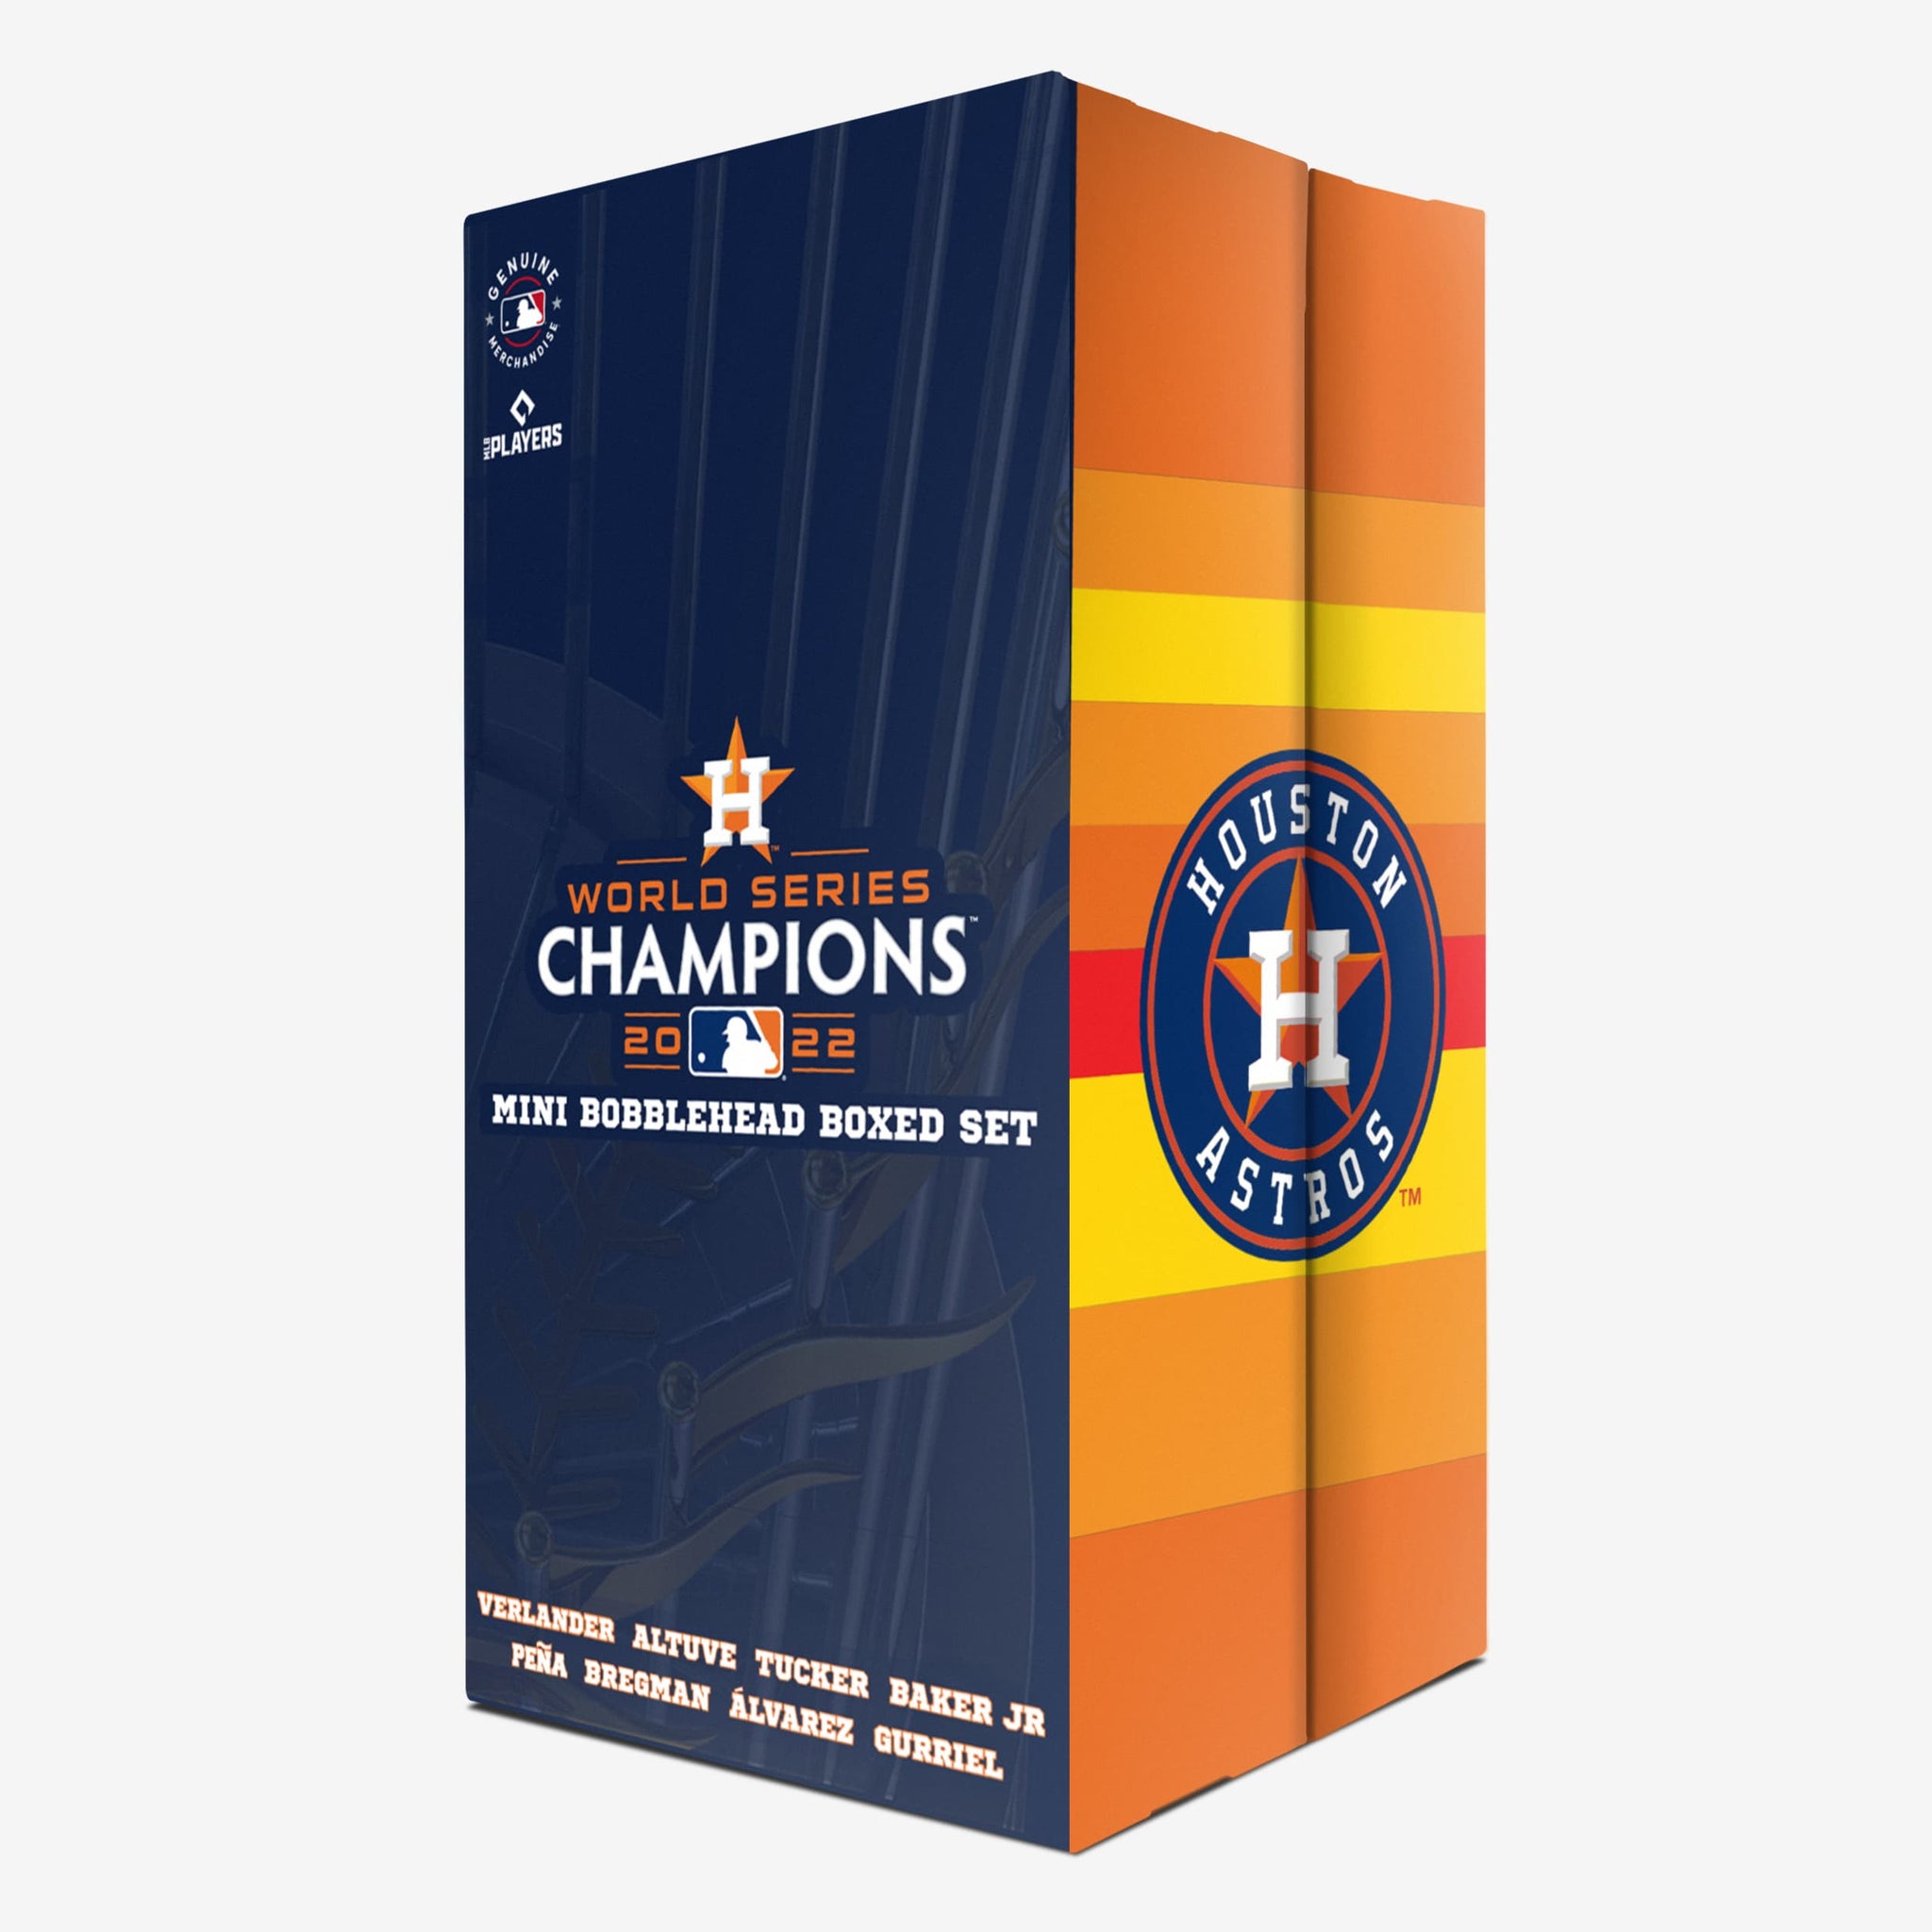 FOCO Launches Houston Astros 'Bobble of the Month' and Massive